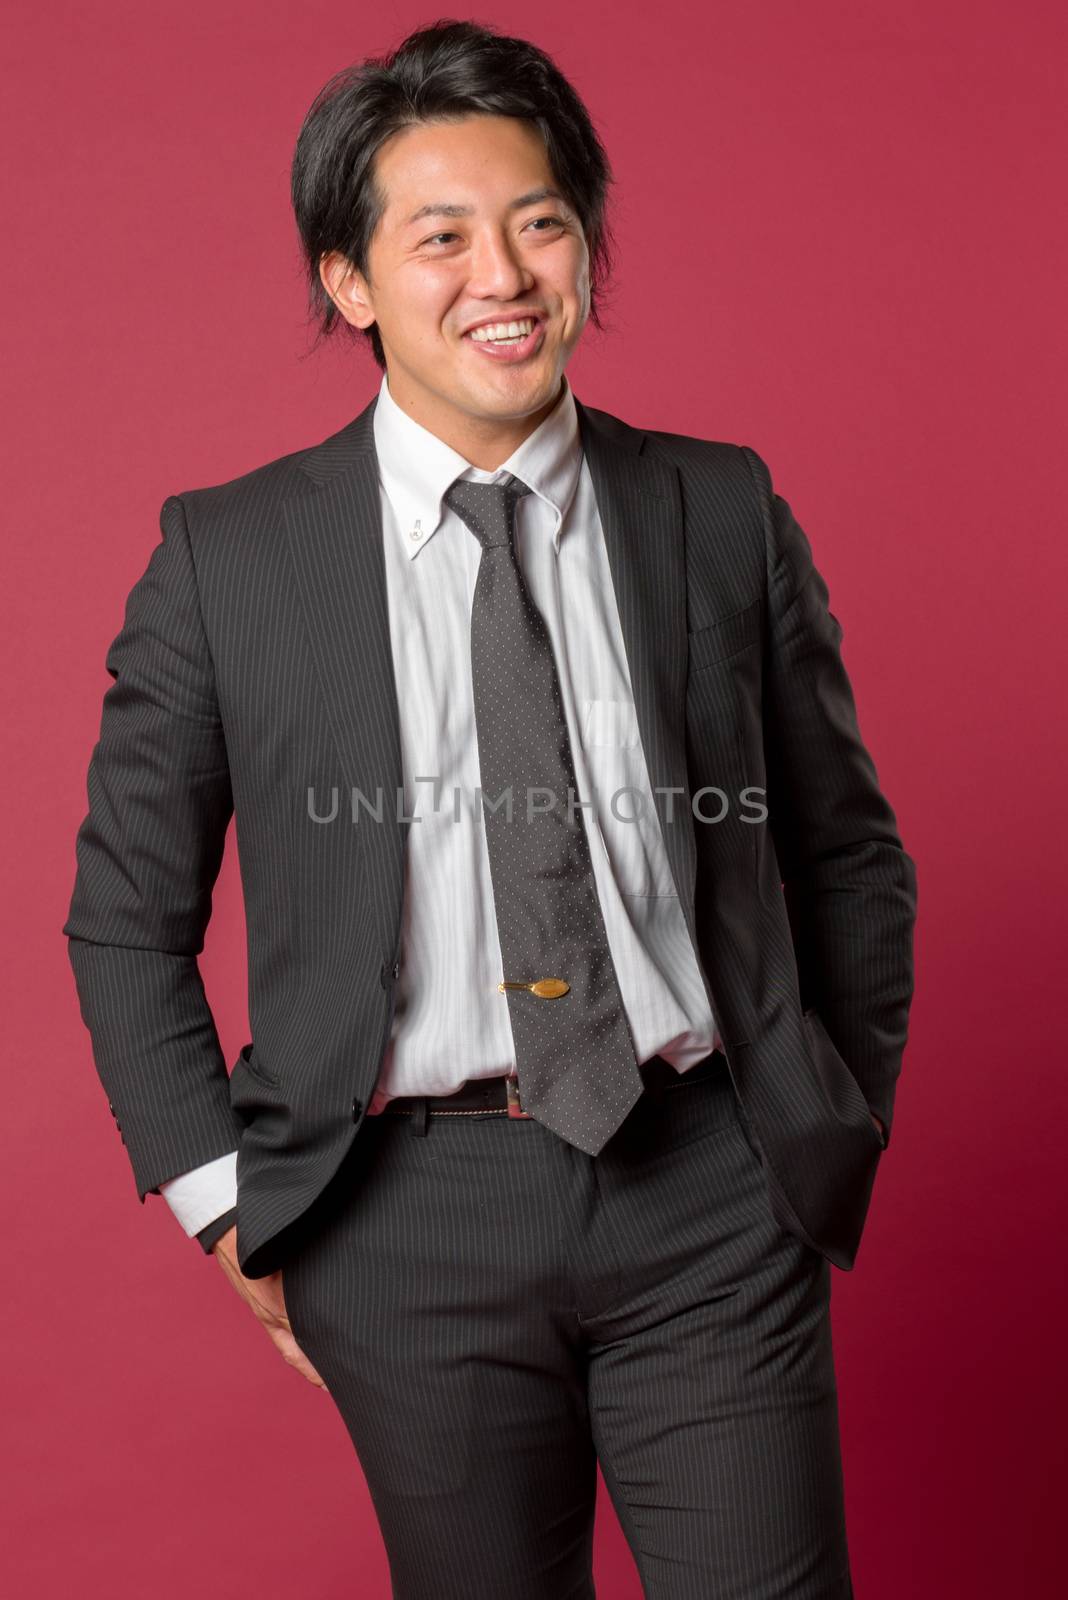 A half body portrait of a young Japanese man in a business suit laughing on a red background.